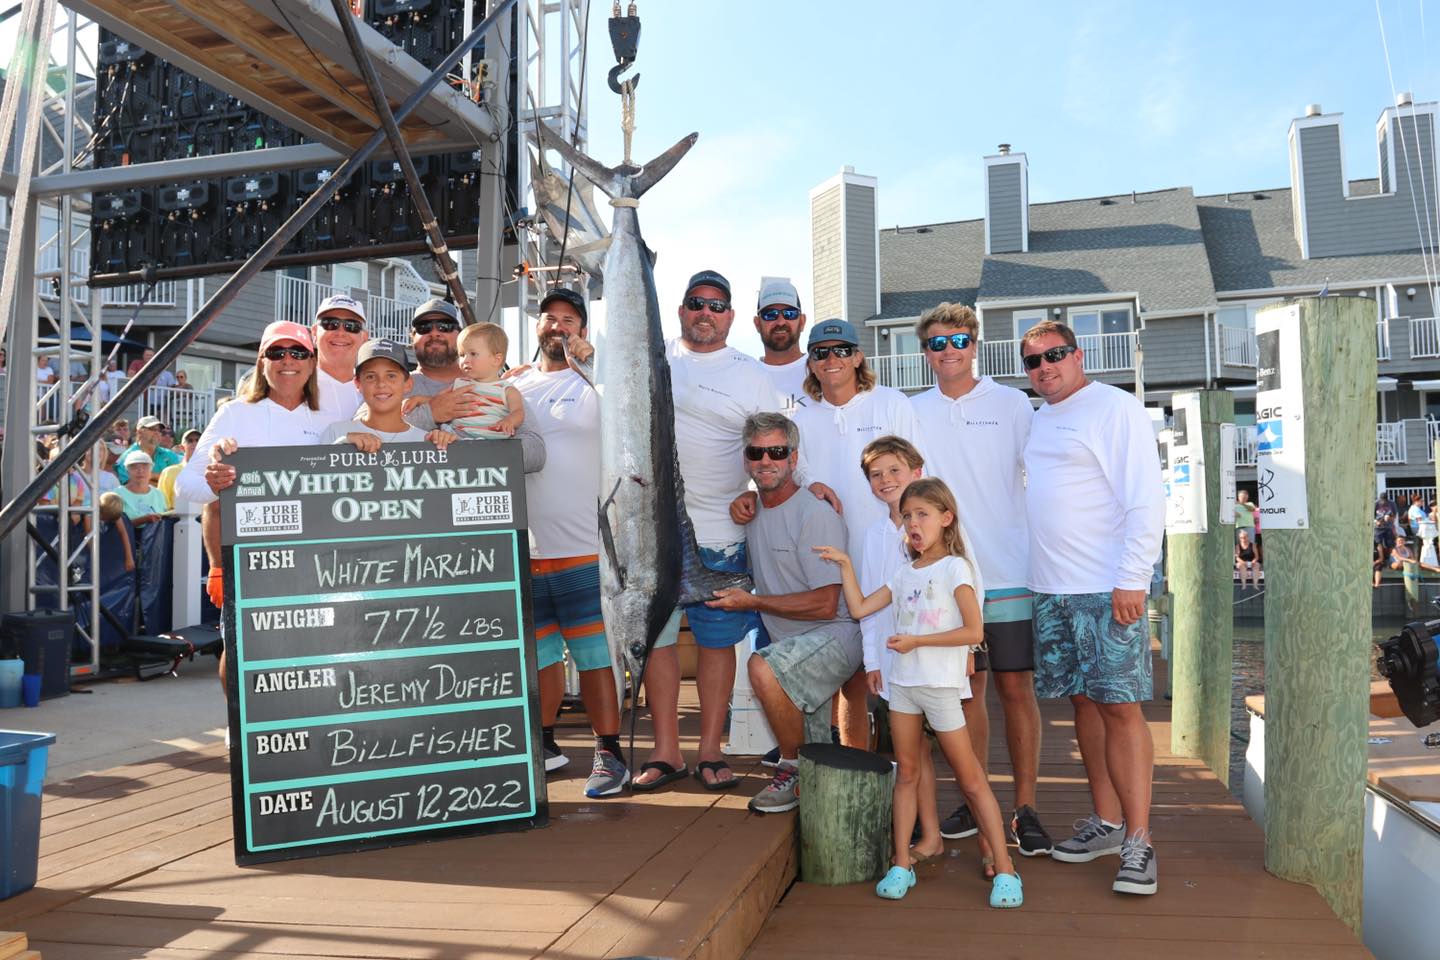 08/17/2022 Record Payout Highlights 2022 White Marlin Open News